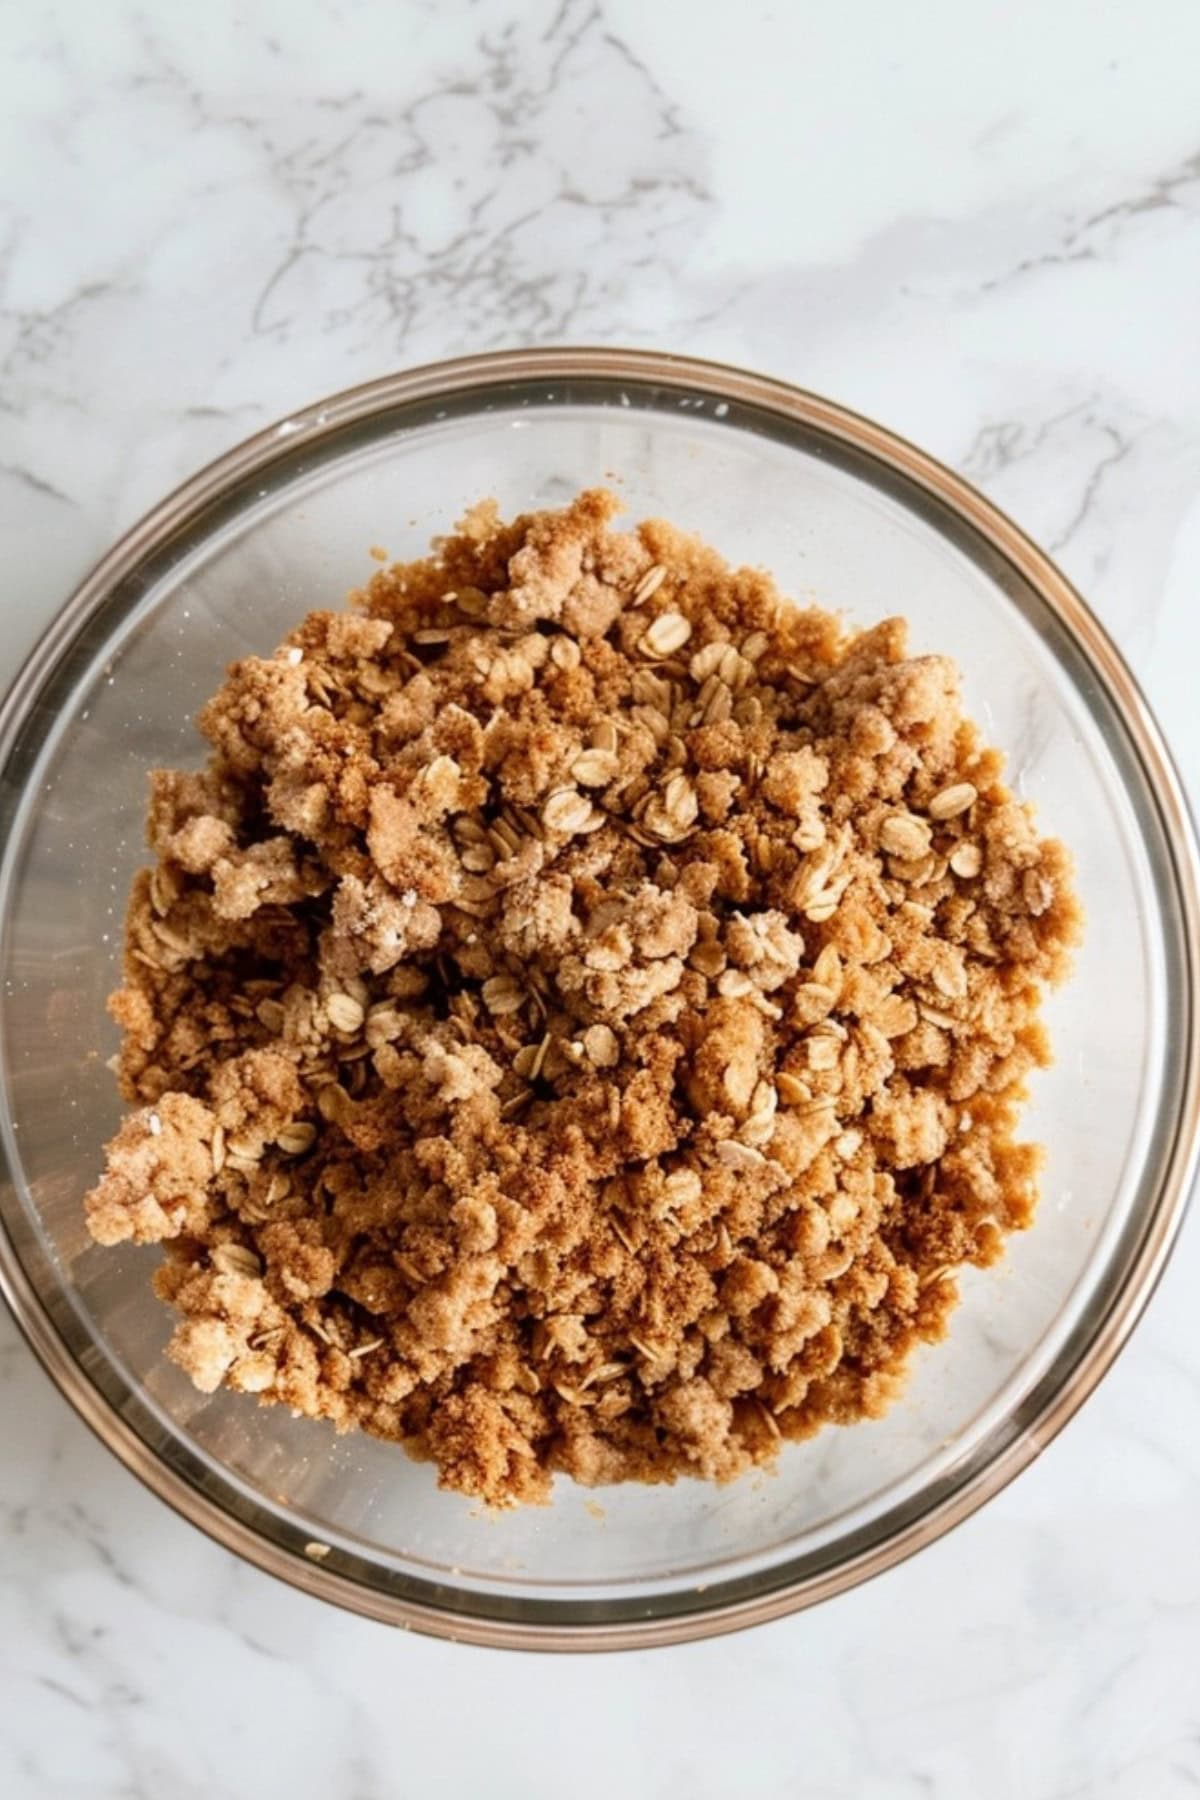 Apple crisp topping made with mixed oats, flour, brown sugar, cinnamon, and salt and butter mixed together to make a coarse crumbs as apple crisp toppings sitting on a white marble table.